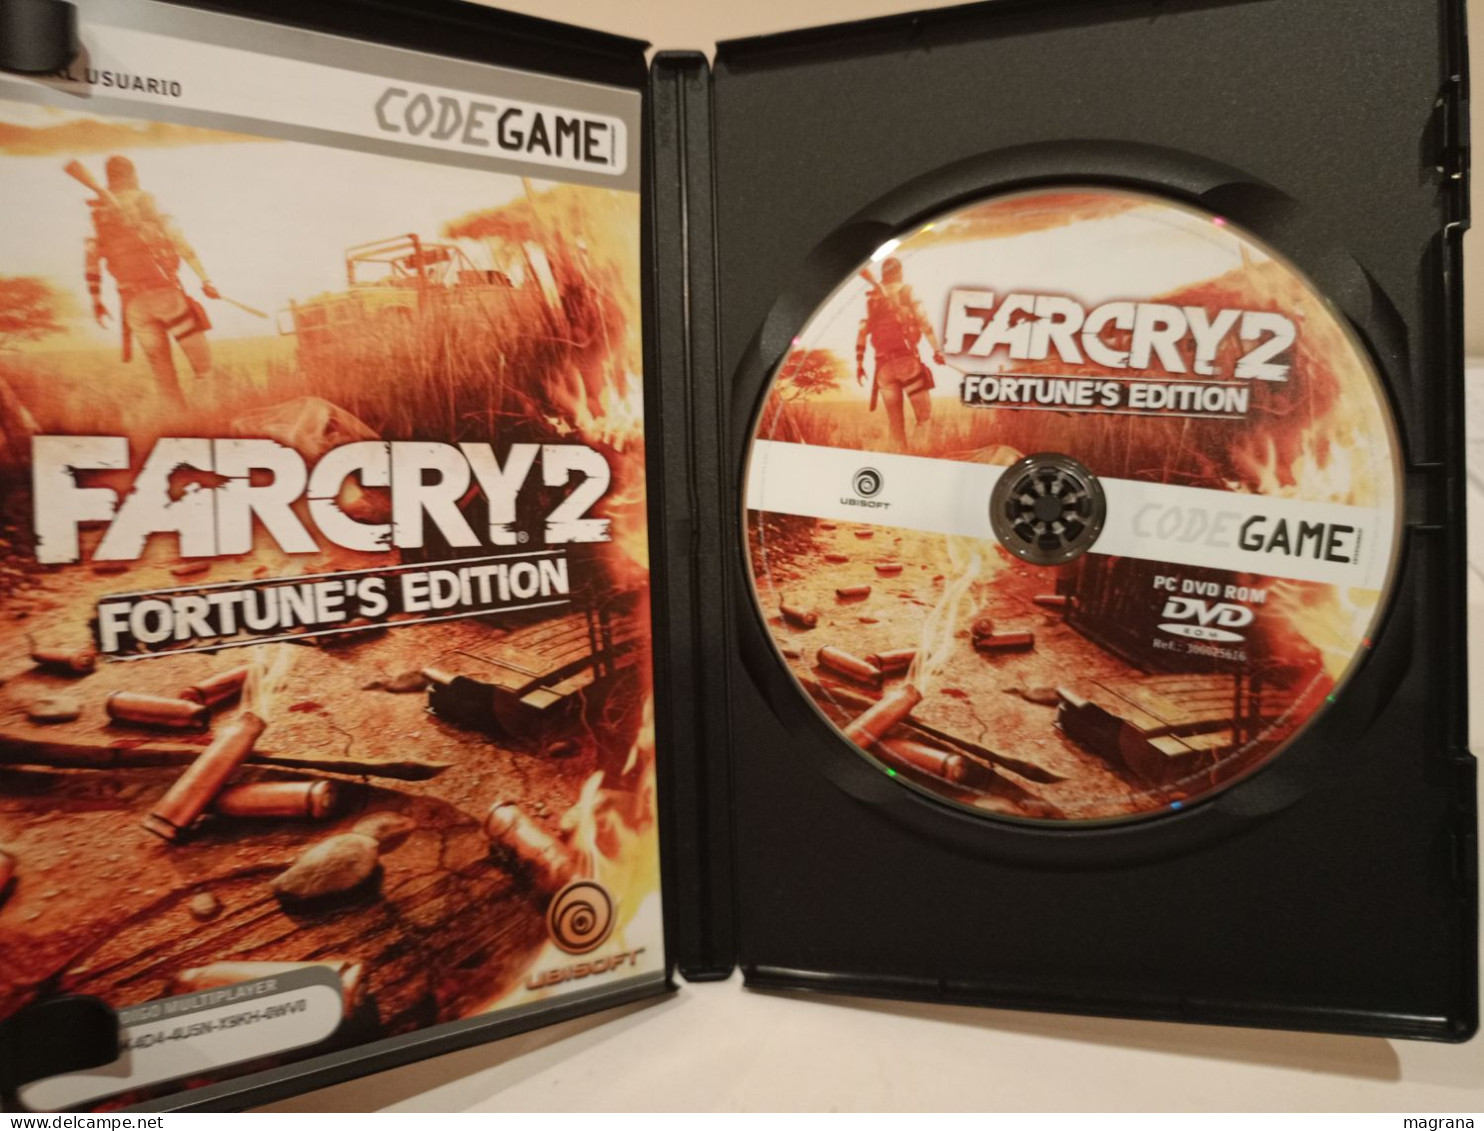 Juego Para PC Dvd Rom. Far Cry 2. Fortune's Edition. Code Game Entertainment. Ubisoft. 2008 - PC-Spiele